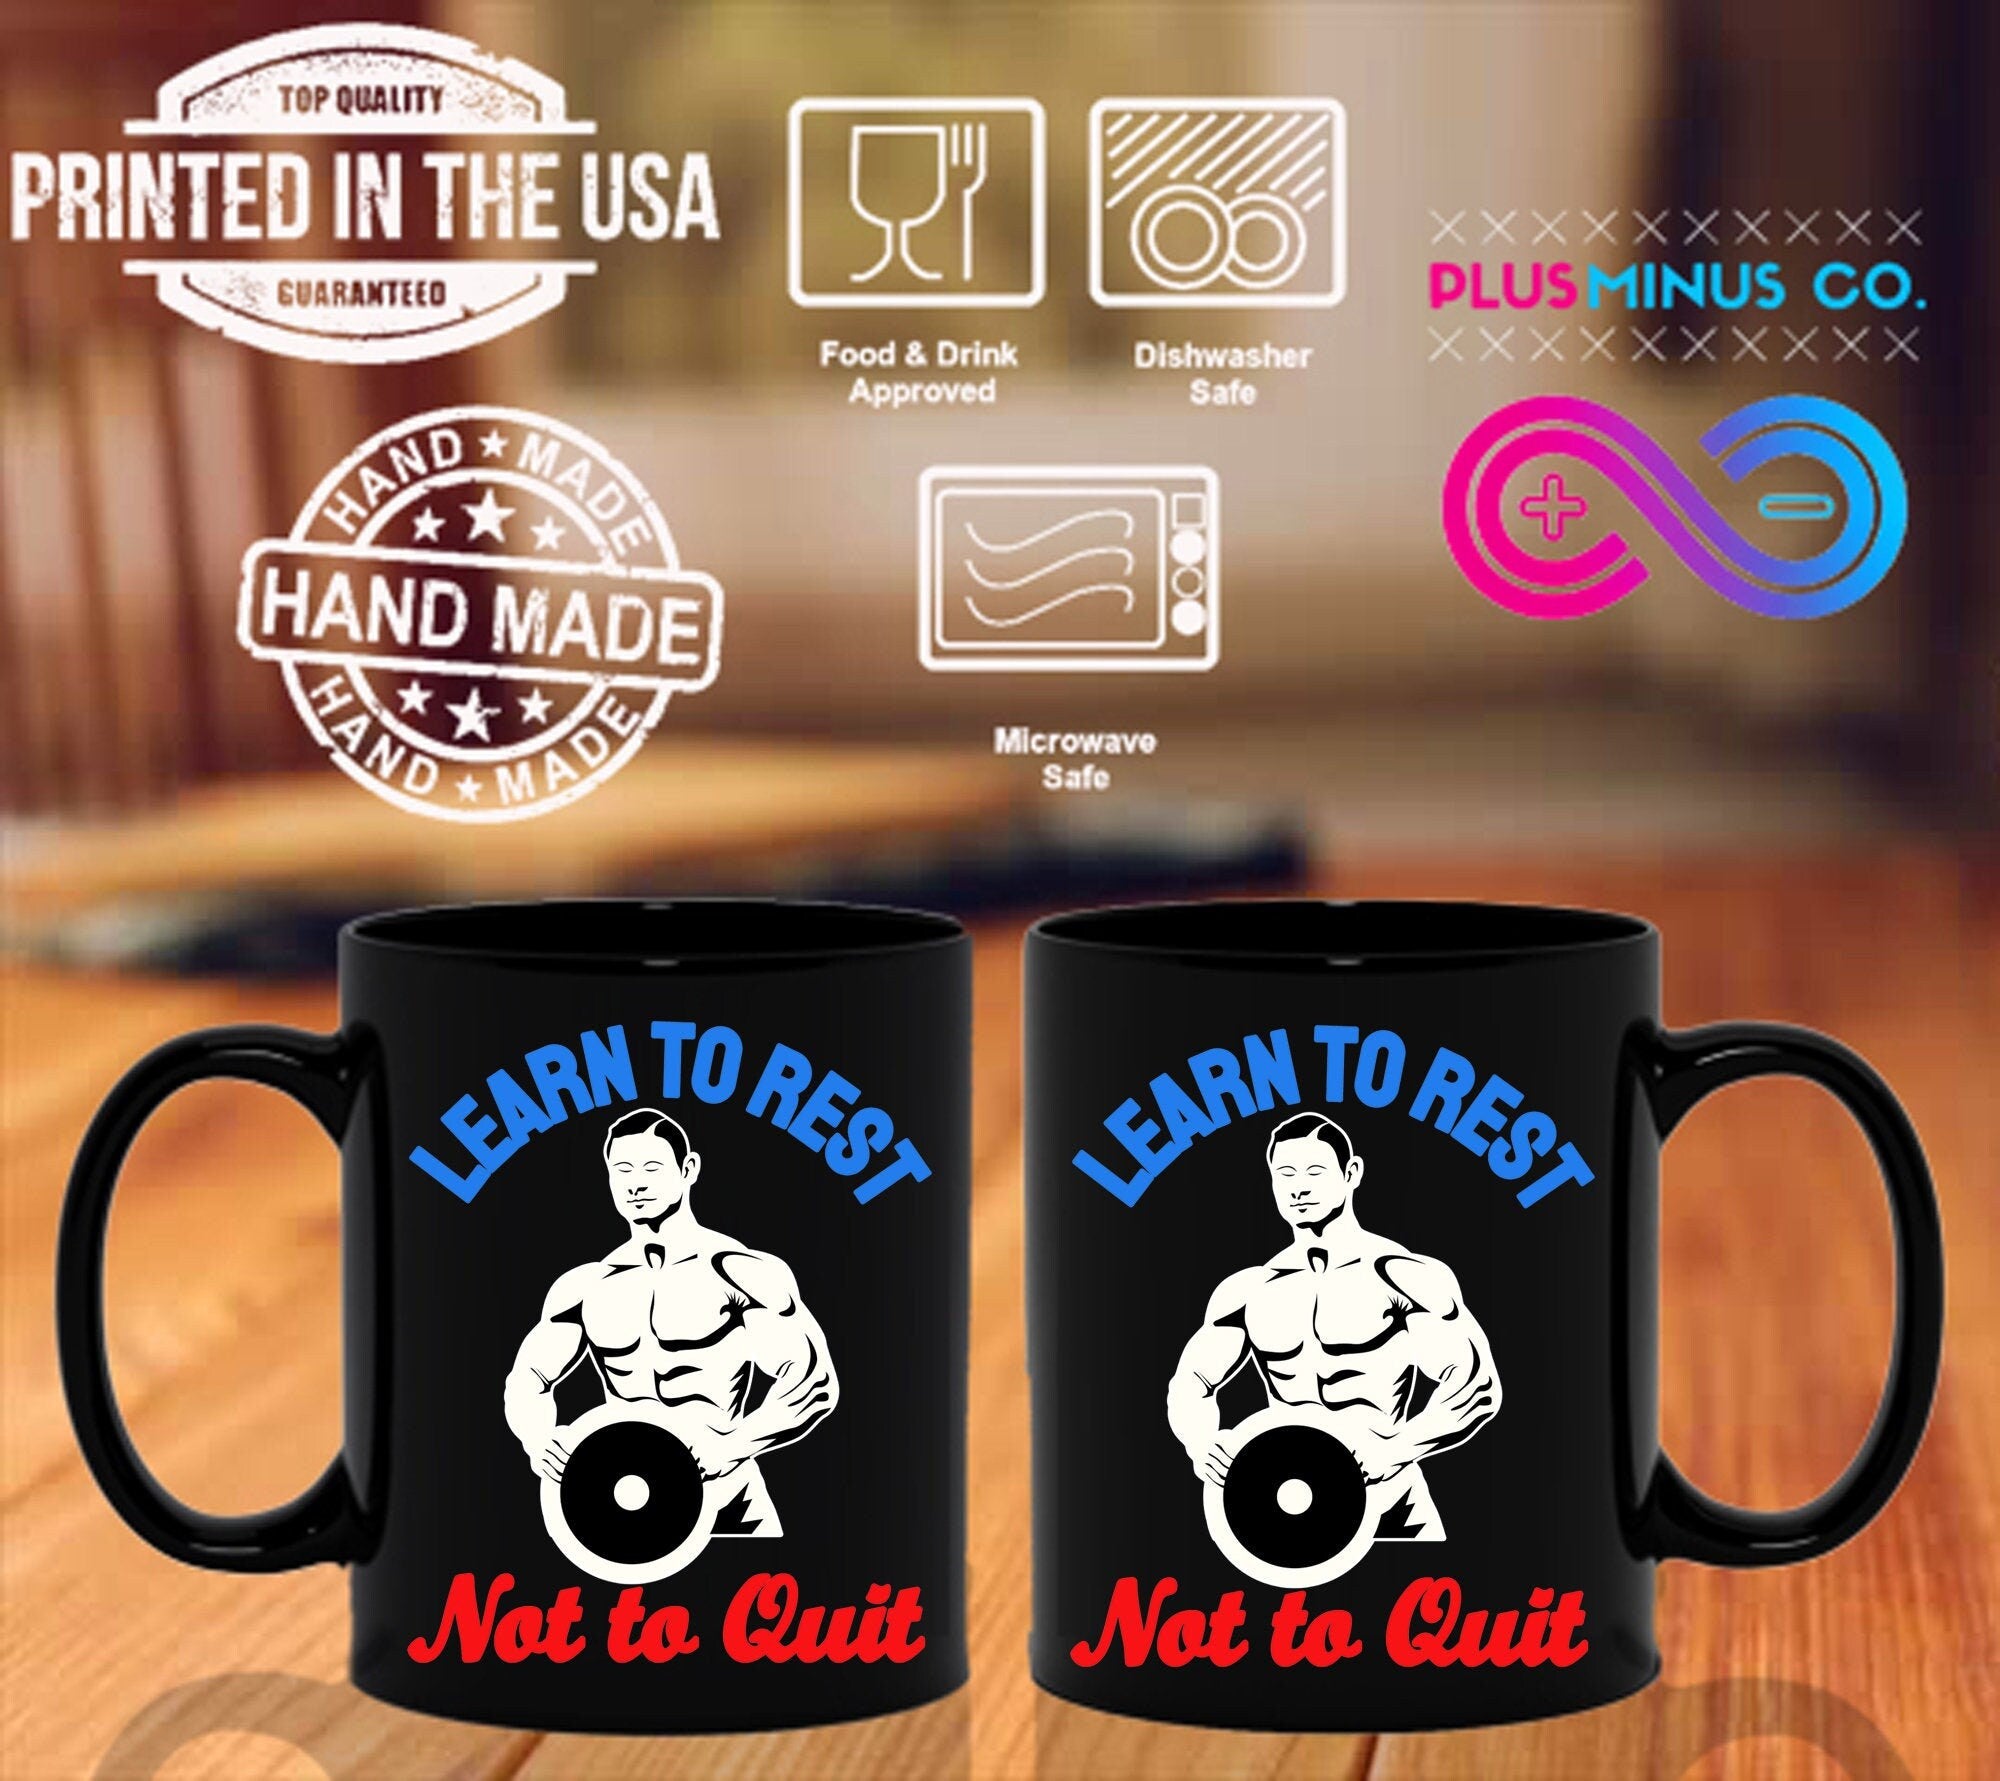 Learn To Rest Not To Quit Black Mugs - plusminusco.com